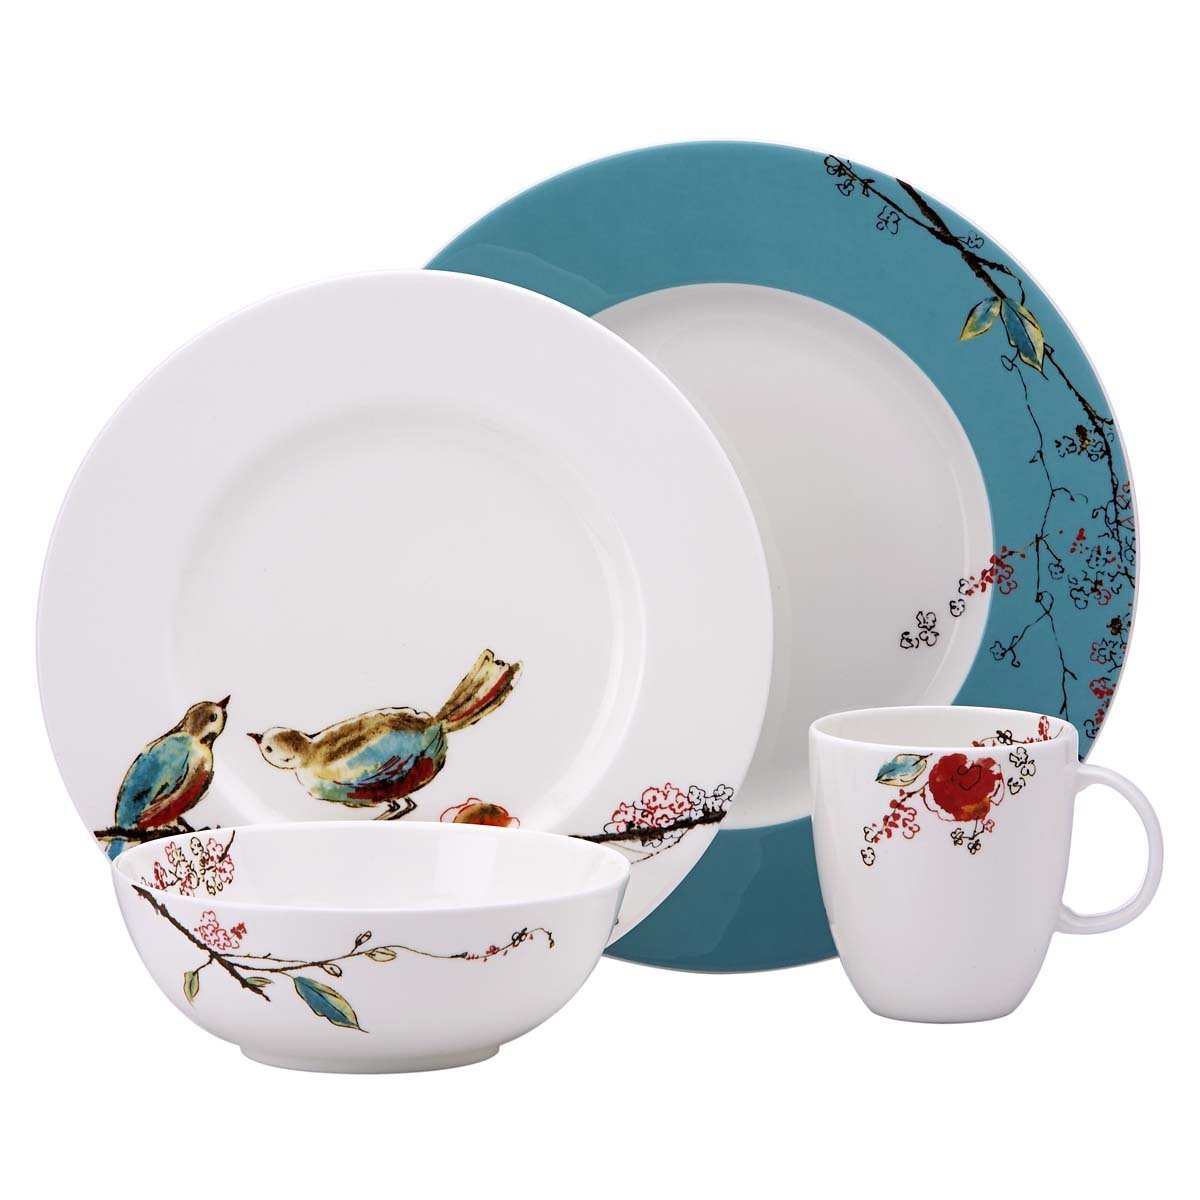 Lenox Simply Fine Chirp 4-Piece Place Setting, Service for 1